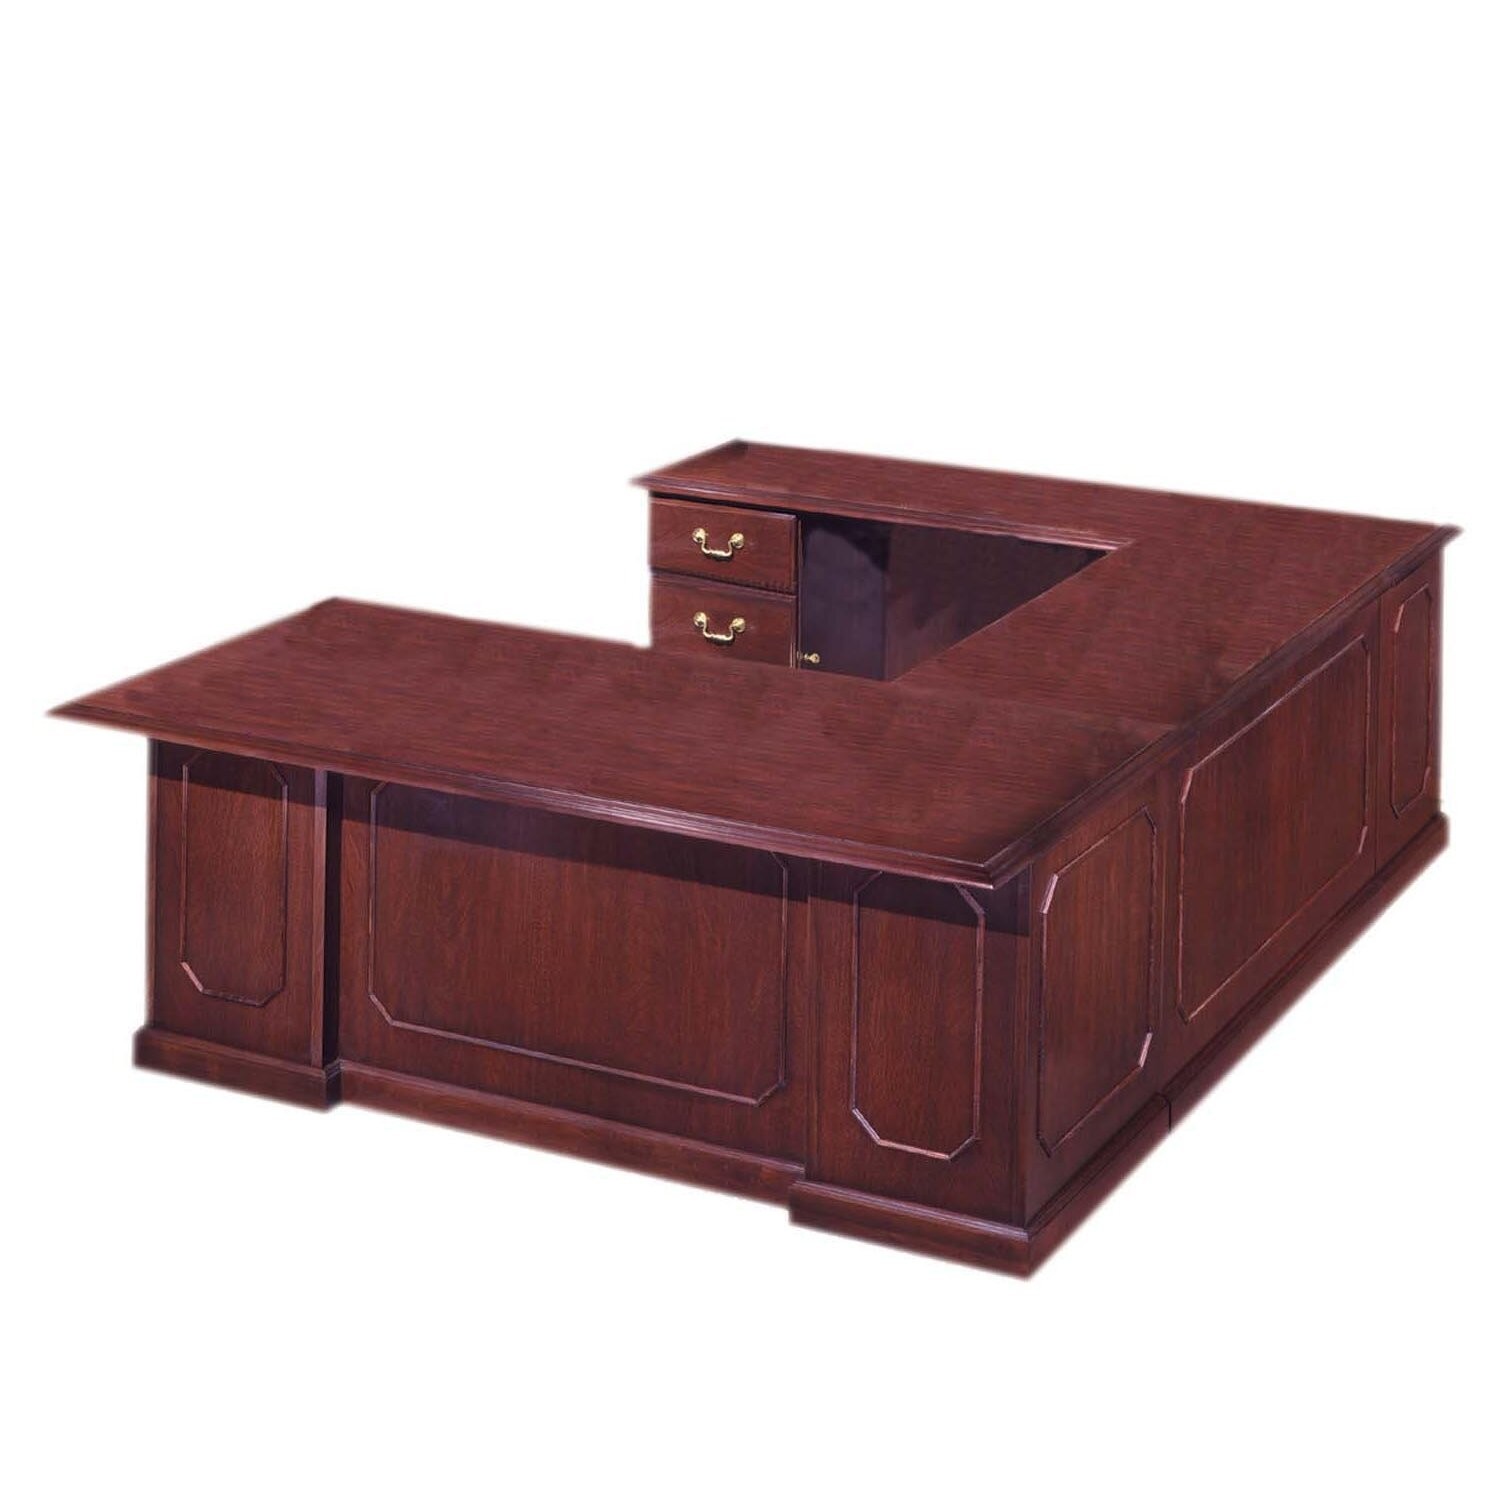 Flexsteel contract governors executive desk with left 1